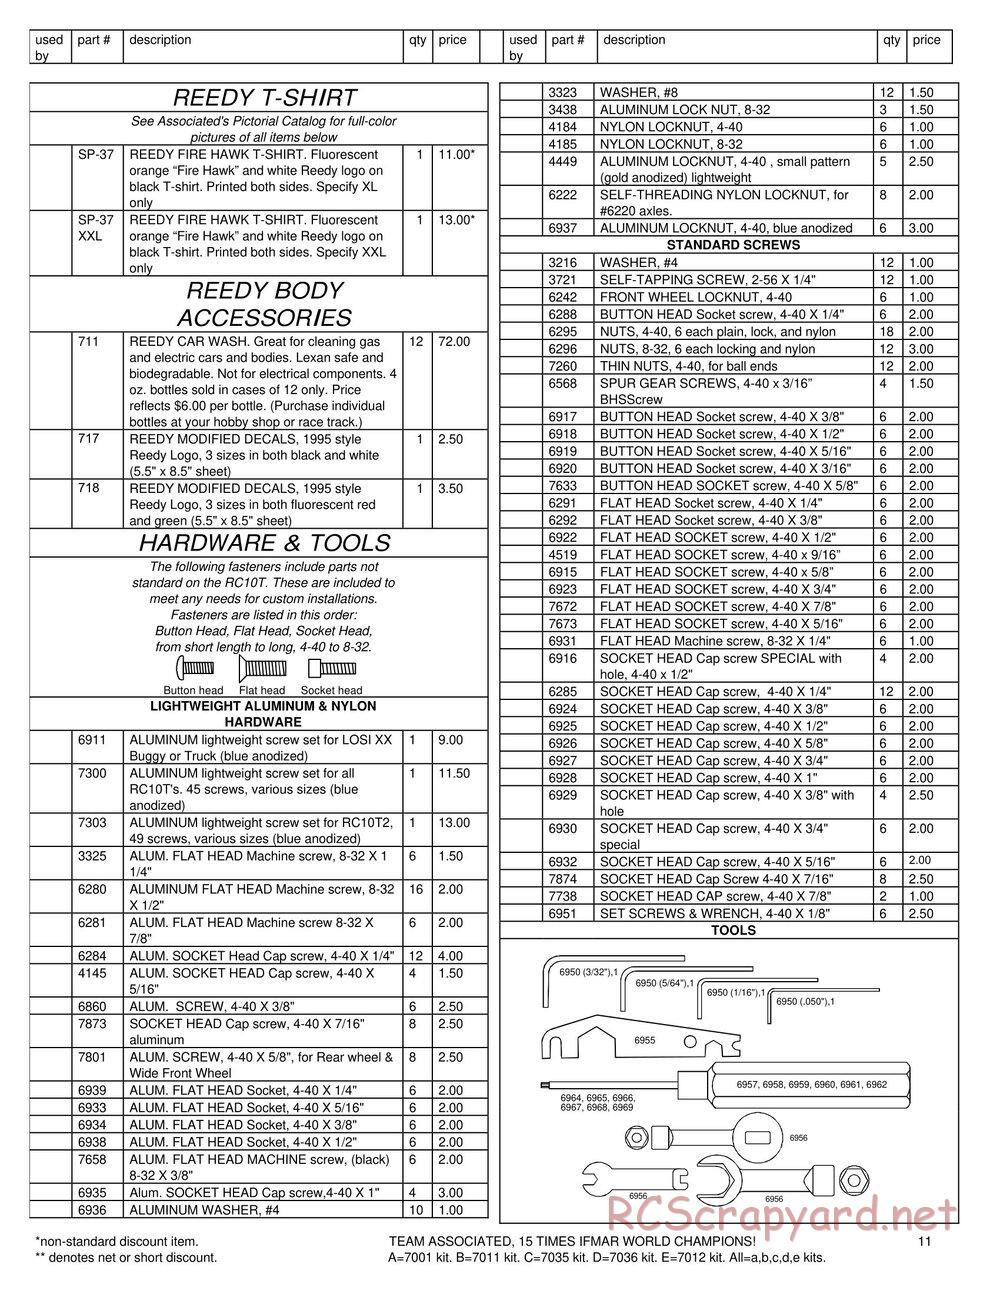 Team Associated - RC10T2 - Parts - Page 10